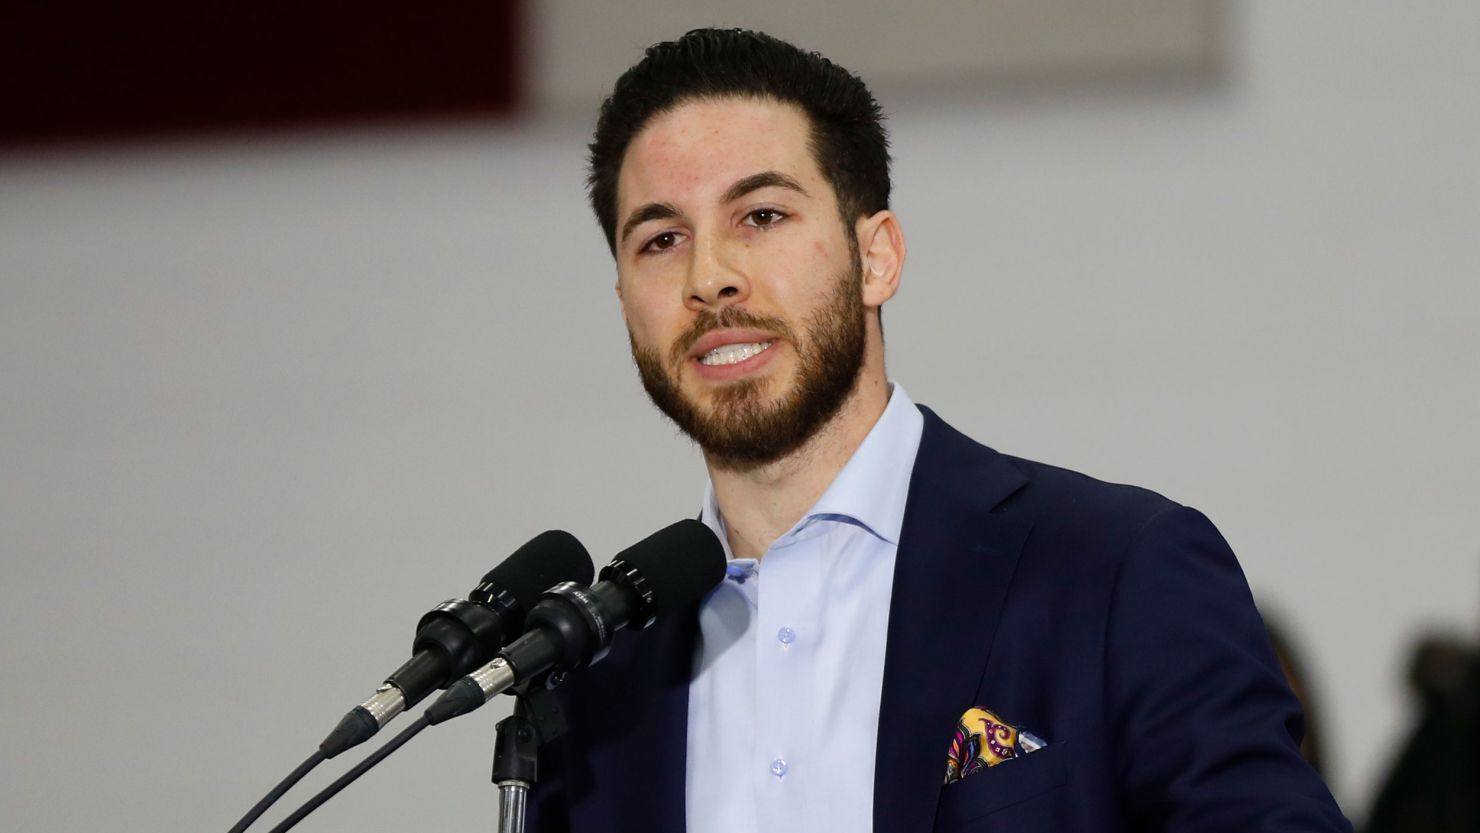 Abdullah Hammoud of Dearborn peaks during a campaign rally on Saturday, March 7, 2020.